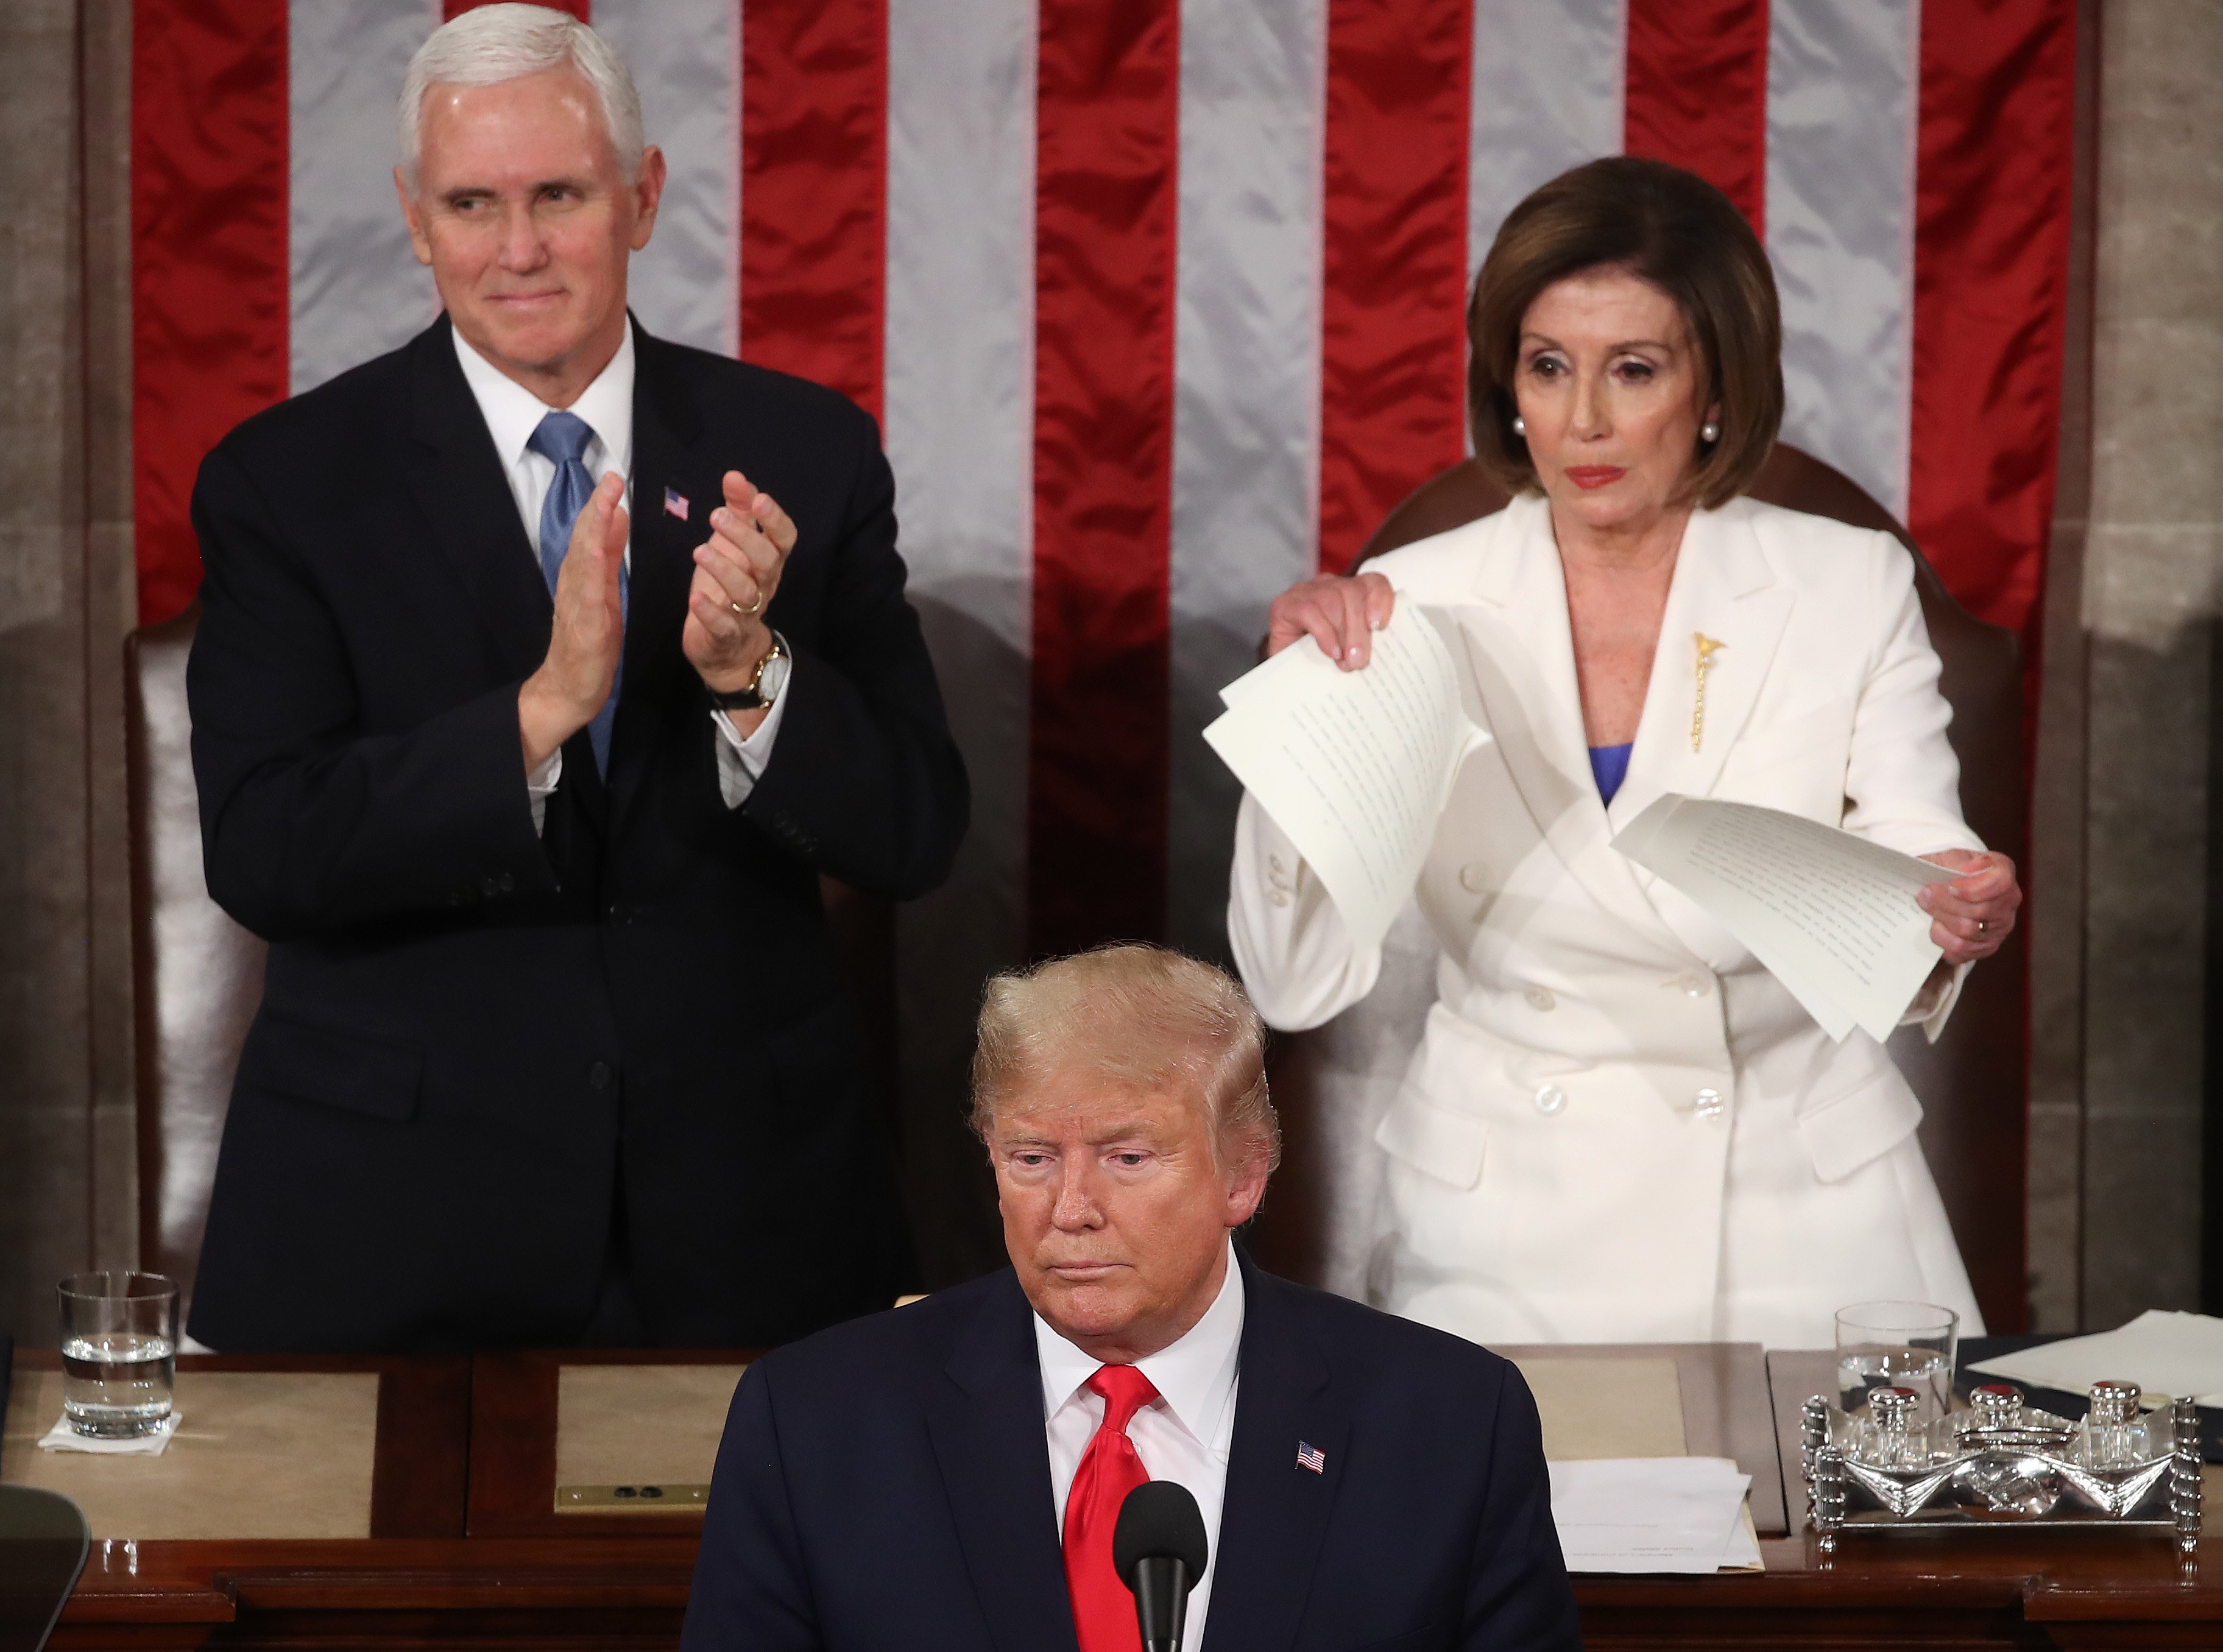 WASHINGTON, DC - FEBRUARY 04: House Speaker Rep. Nancy Pelosi (D-CA) rips up pages of the State of the Union speech after U.S. President Donald Trump finishes his State of the Union speech in the chamber of the U.S. House of Representatives on February 04, 2020 in Washington, DC. President Trump delivers his third State of the Union to the nation the night before the U.S. Senate is set to vote in his impeachment trial. (Photo by Mark Wilson/Getty Images)